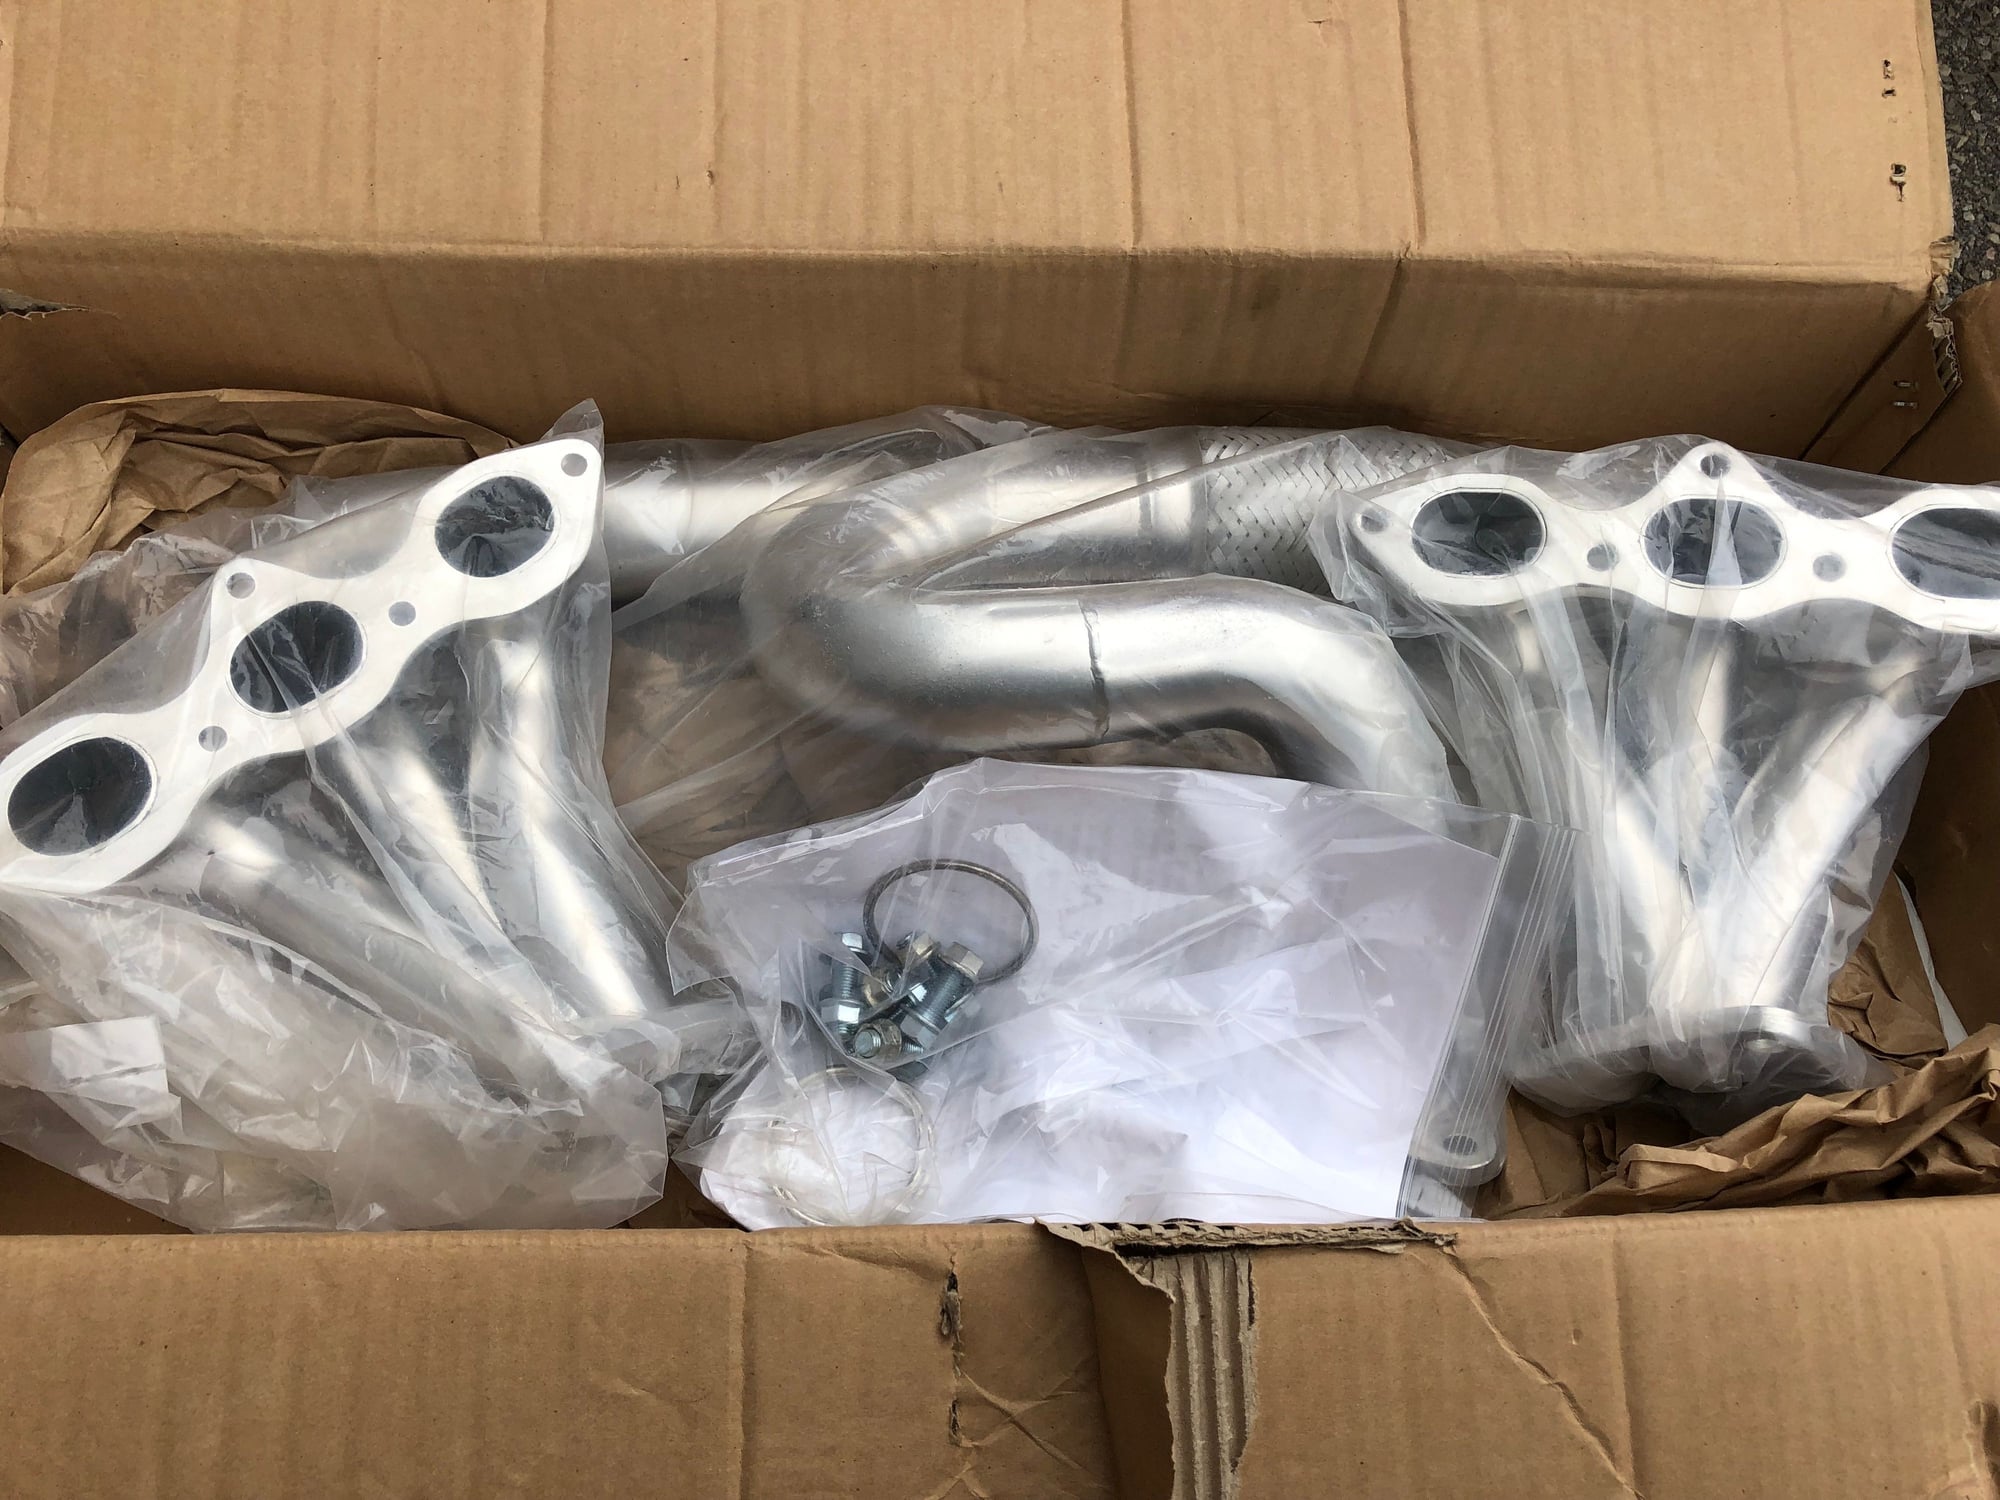 Engine - Exhaust - FS: DC Sports HHC5528 3 - 1 Ceramic Headers - New - 1999 to 2003 Acura TL - 2001 to 2003 Acura CL - 1997 to 2002 Honda Accord - Toronto, ON M3N1B9, Canada